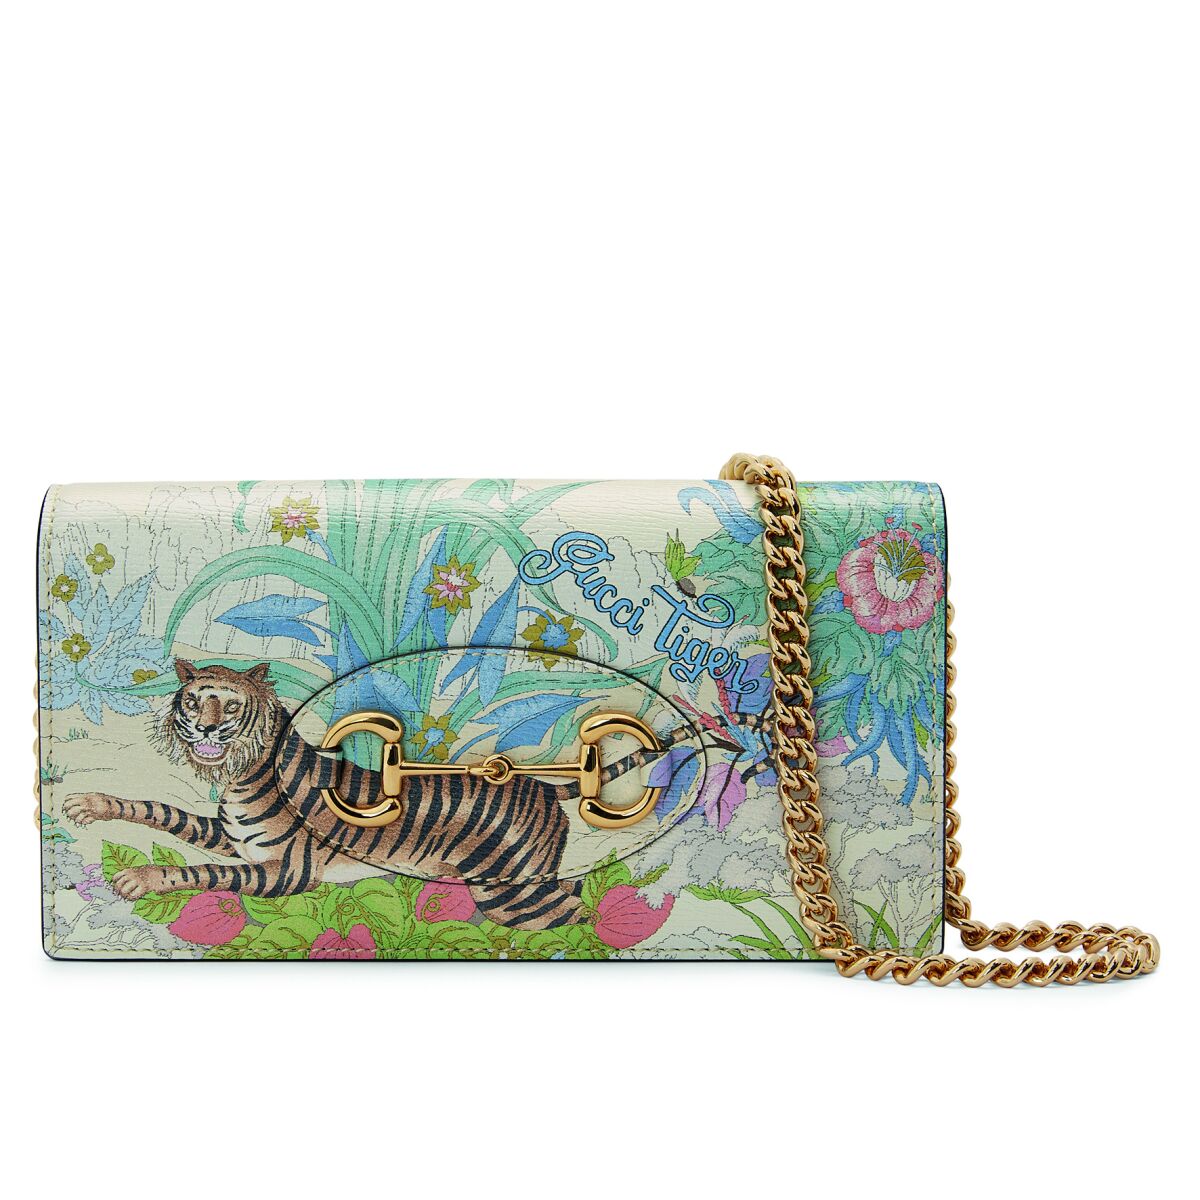 A rectangular wallet with a tiger design  on the front.